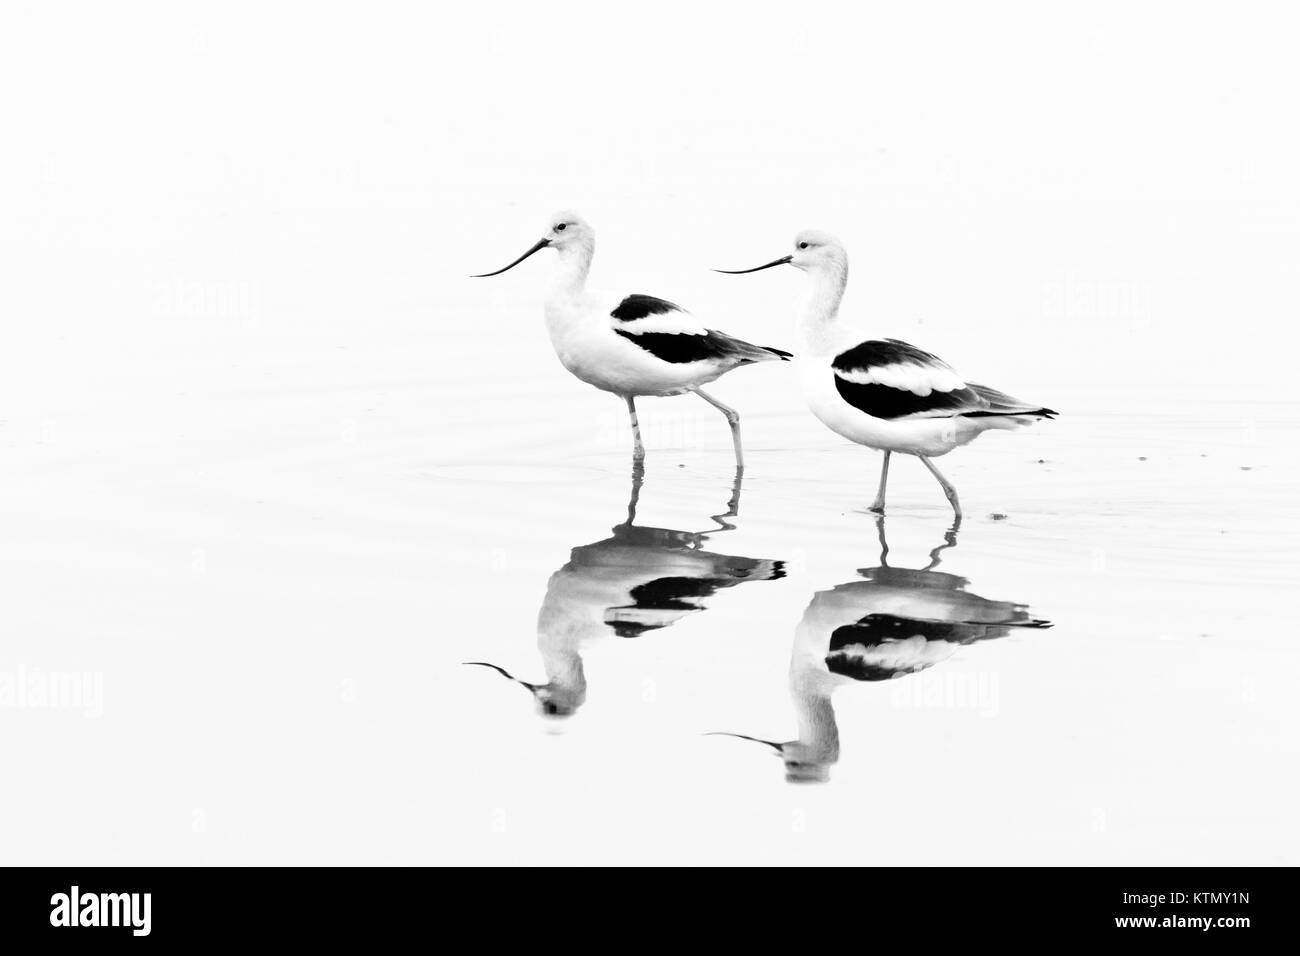 American Avocets, in winter plumage, wading in the waters of the San Pablo Bay National Wildlife Refuge in northern California. Stock Photo